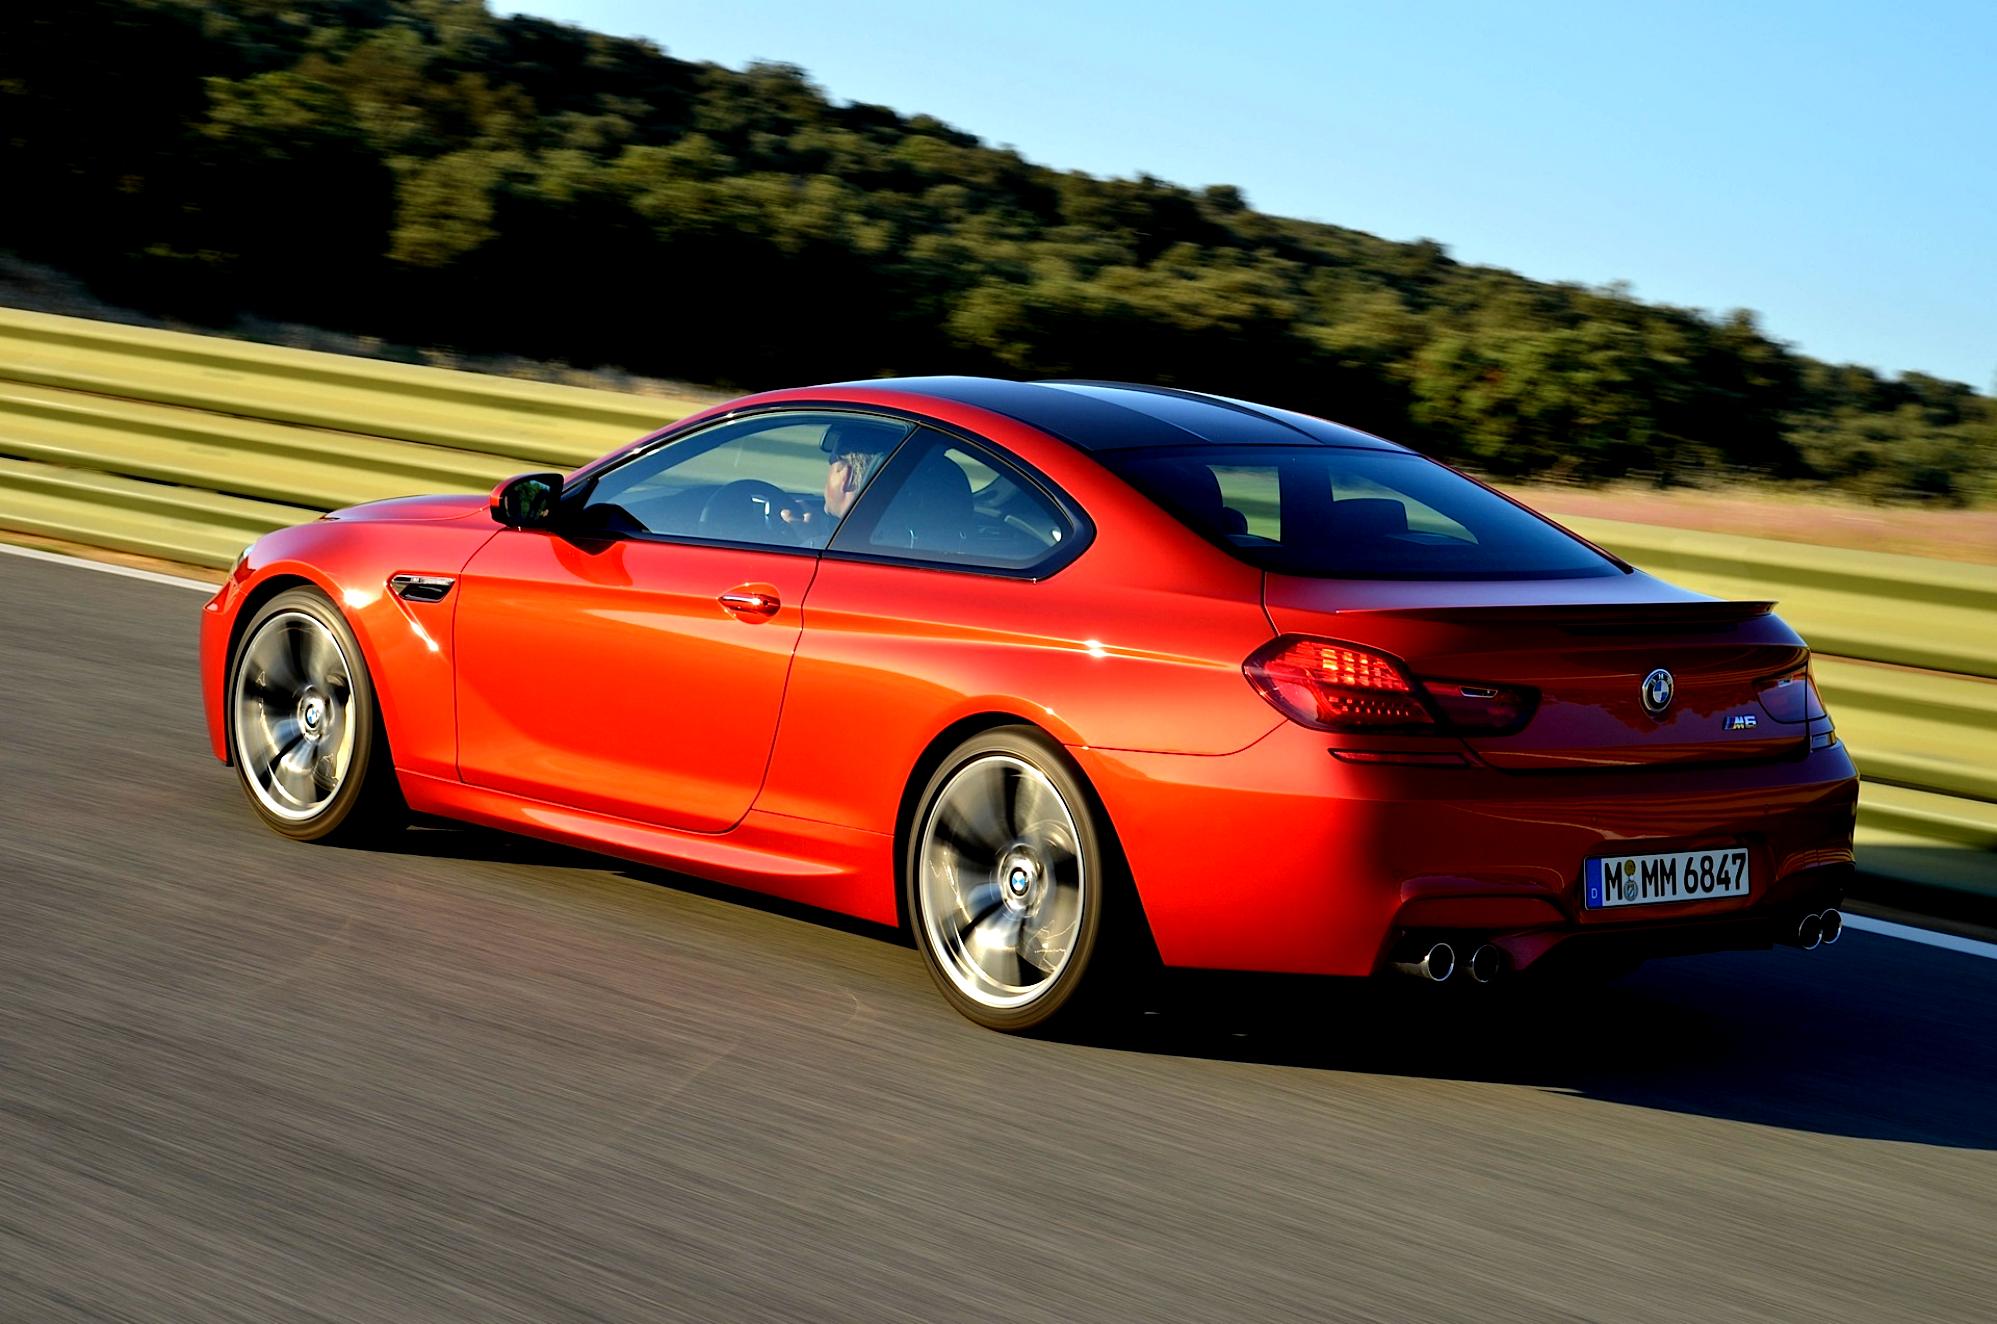 BMW M6 Coupe F13 2012 #35